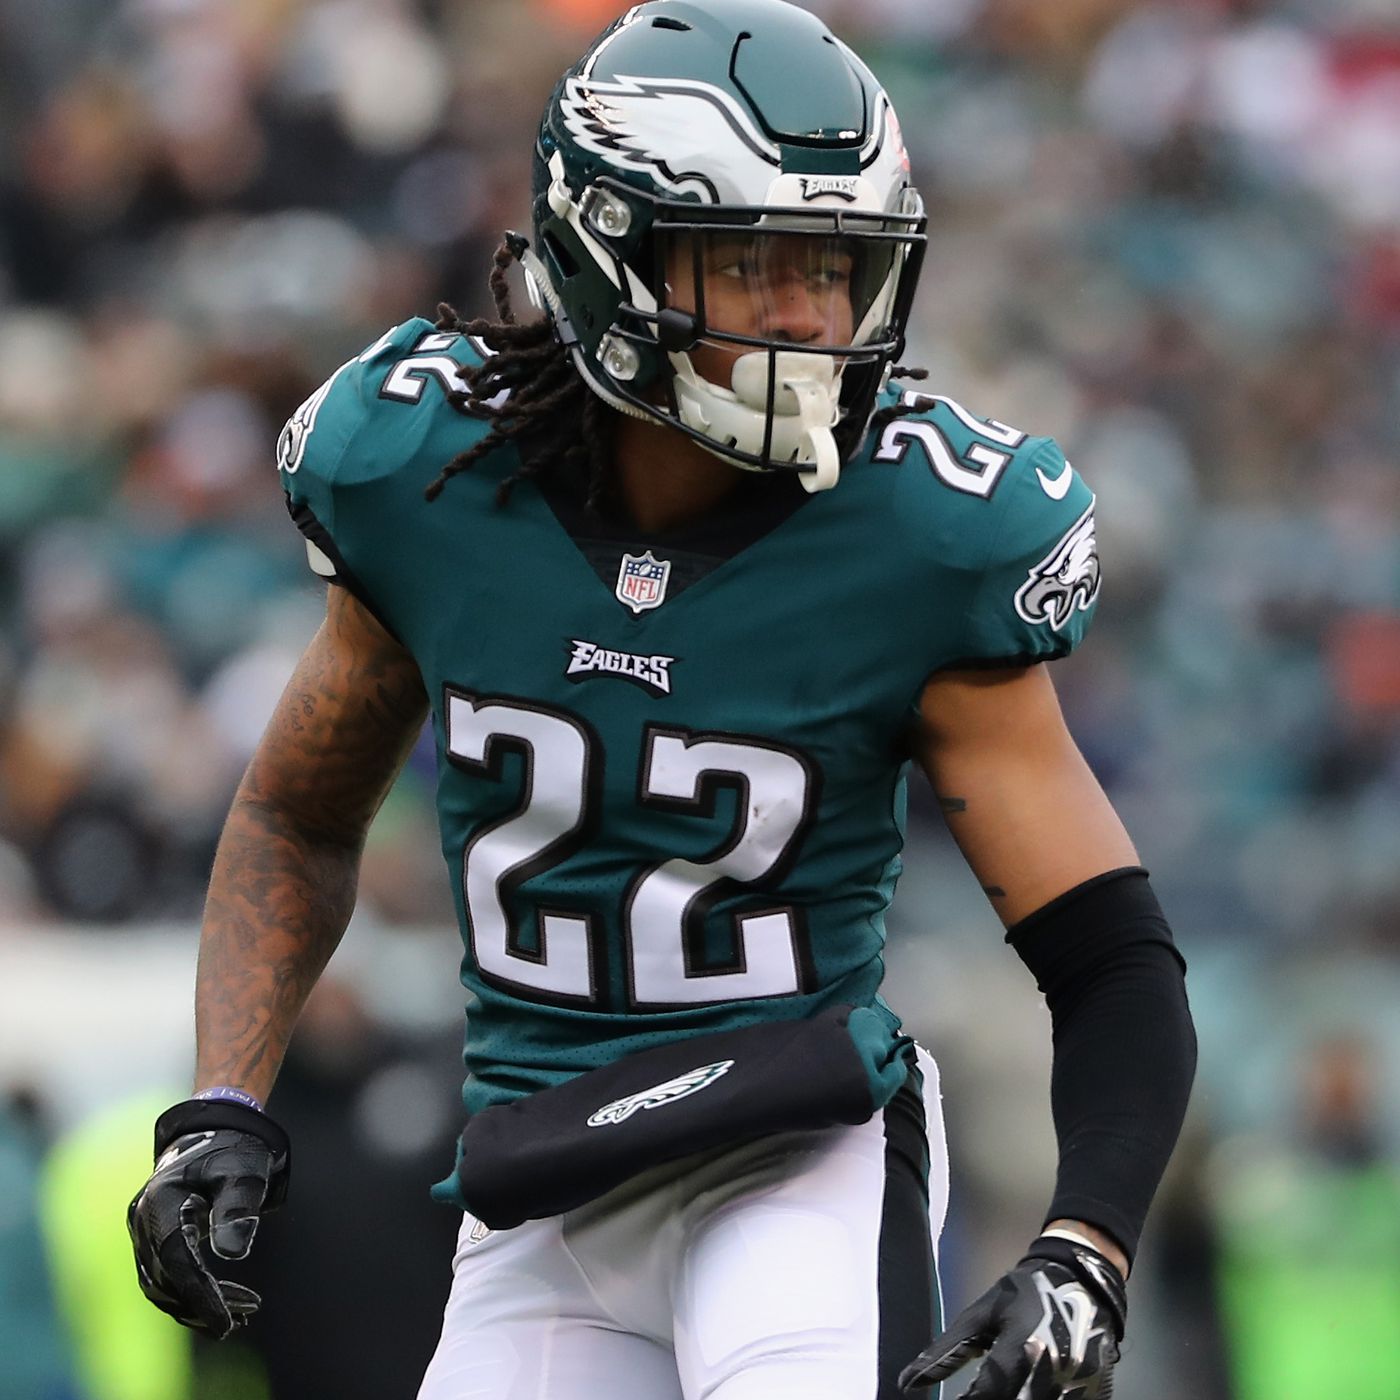 SIDNEY JONES AMONG SEVERAL PLAYERS TO LAUNCH INAUGURAL ONLINE GAMING FRANCHISES